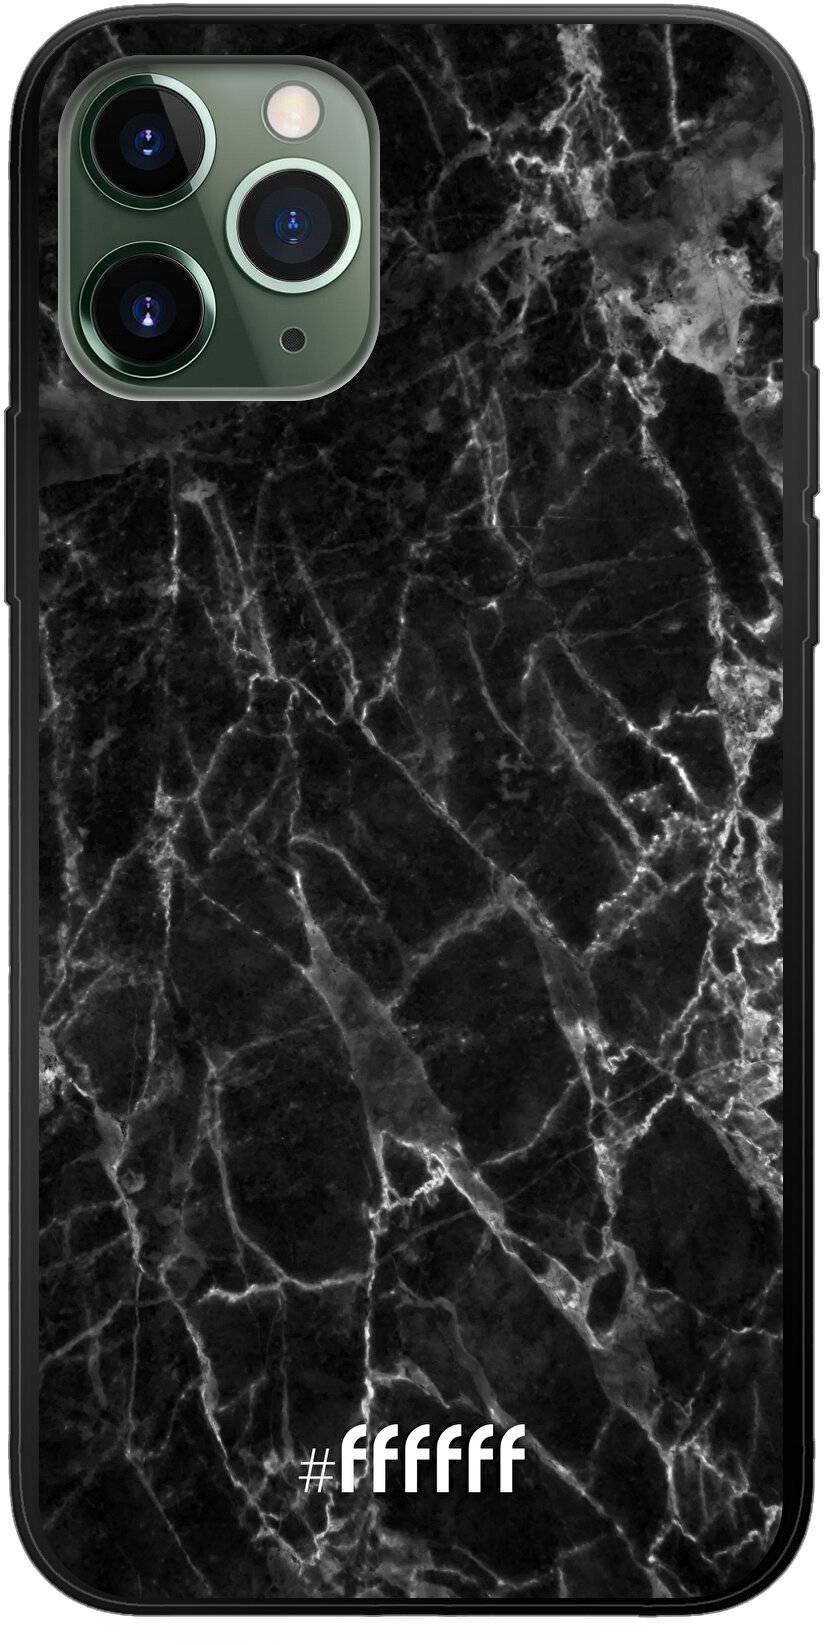 Shattered Marble iPhone 11 Pro